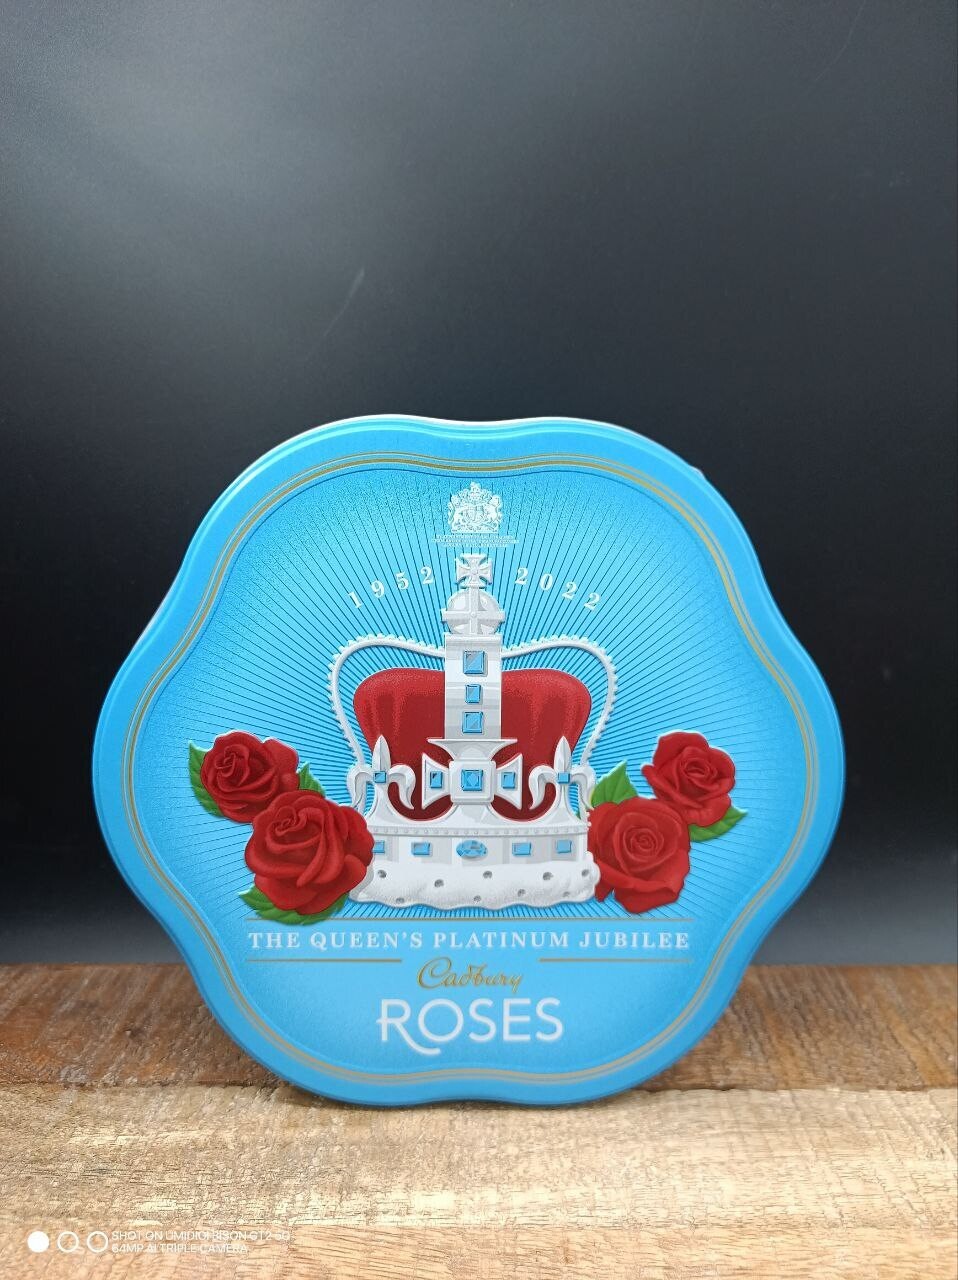 Queens Platinum Jubilee Limited Edition Roses Tin 442g Promo